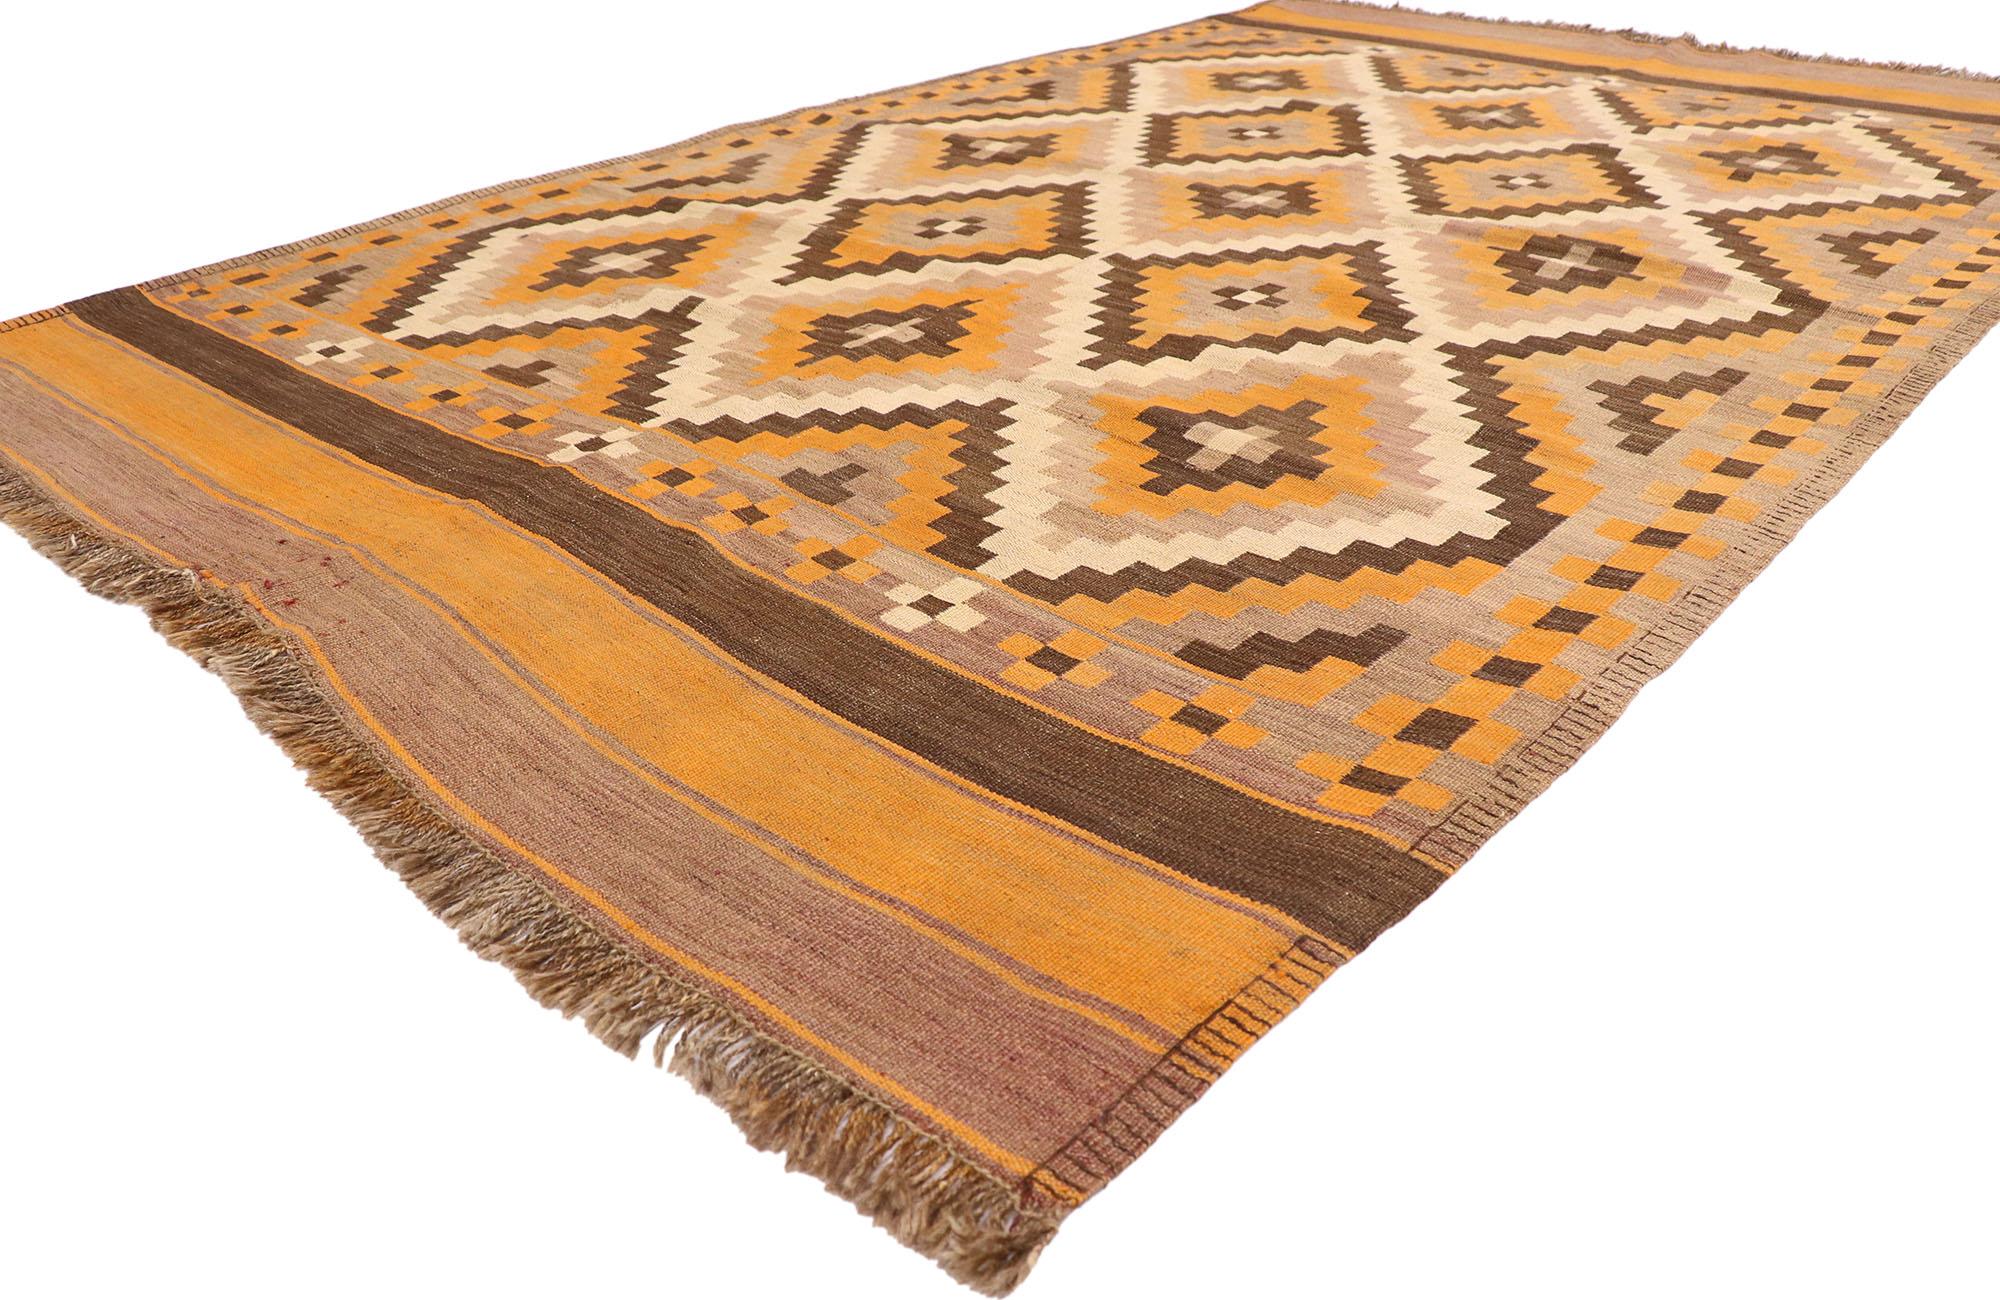 77948 Vintage Afghan Maimana Kilim rug with Bohemian Southwestern Style 05'10 x 09'03. Full of tiny details and a bold expressive design combined with vibrant colors and tribal style, this hand-woven wool vintage Afghani Maimana kilim rug is a